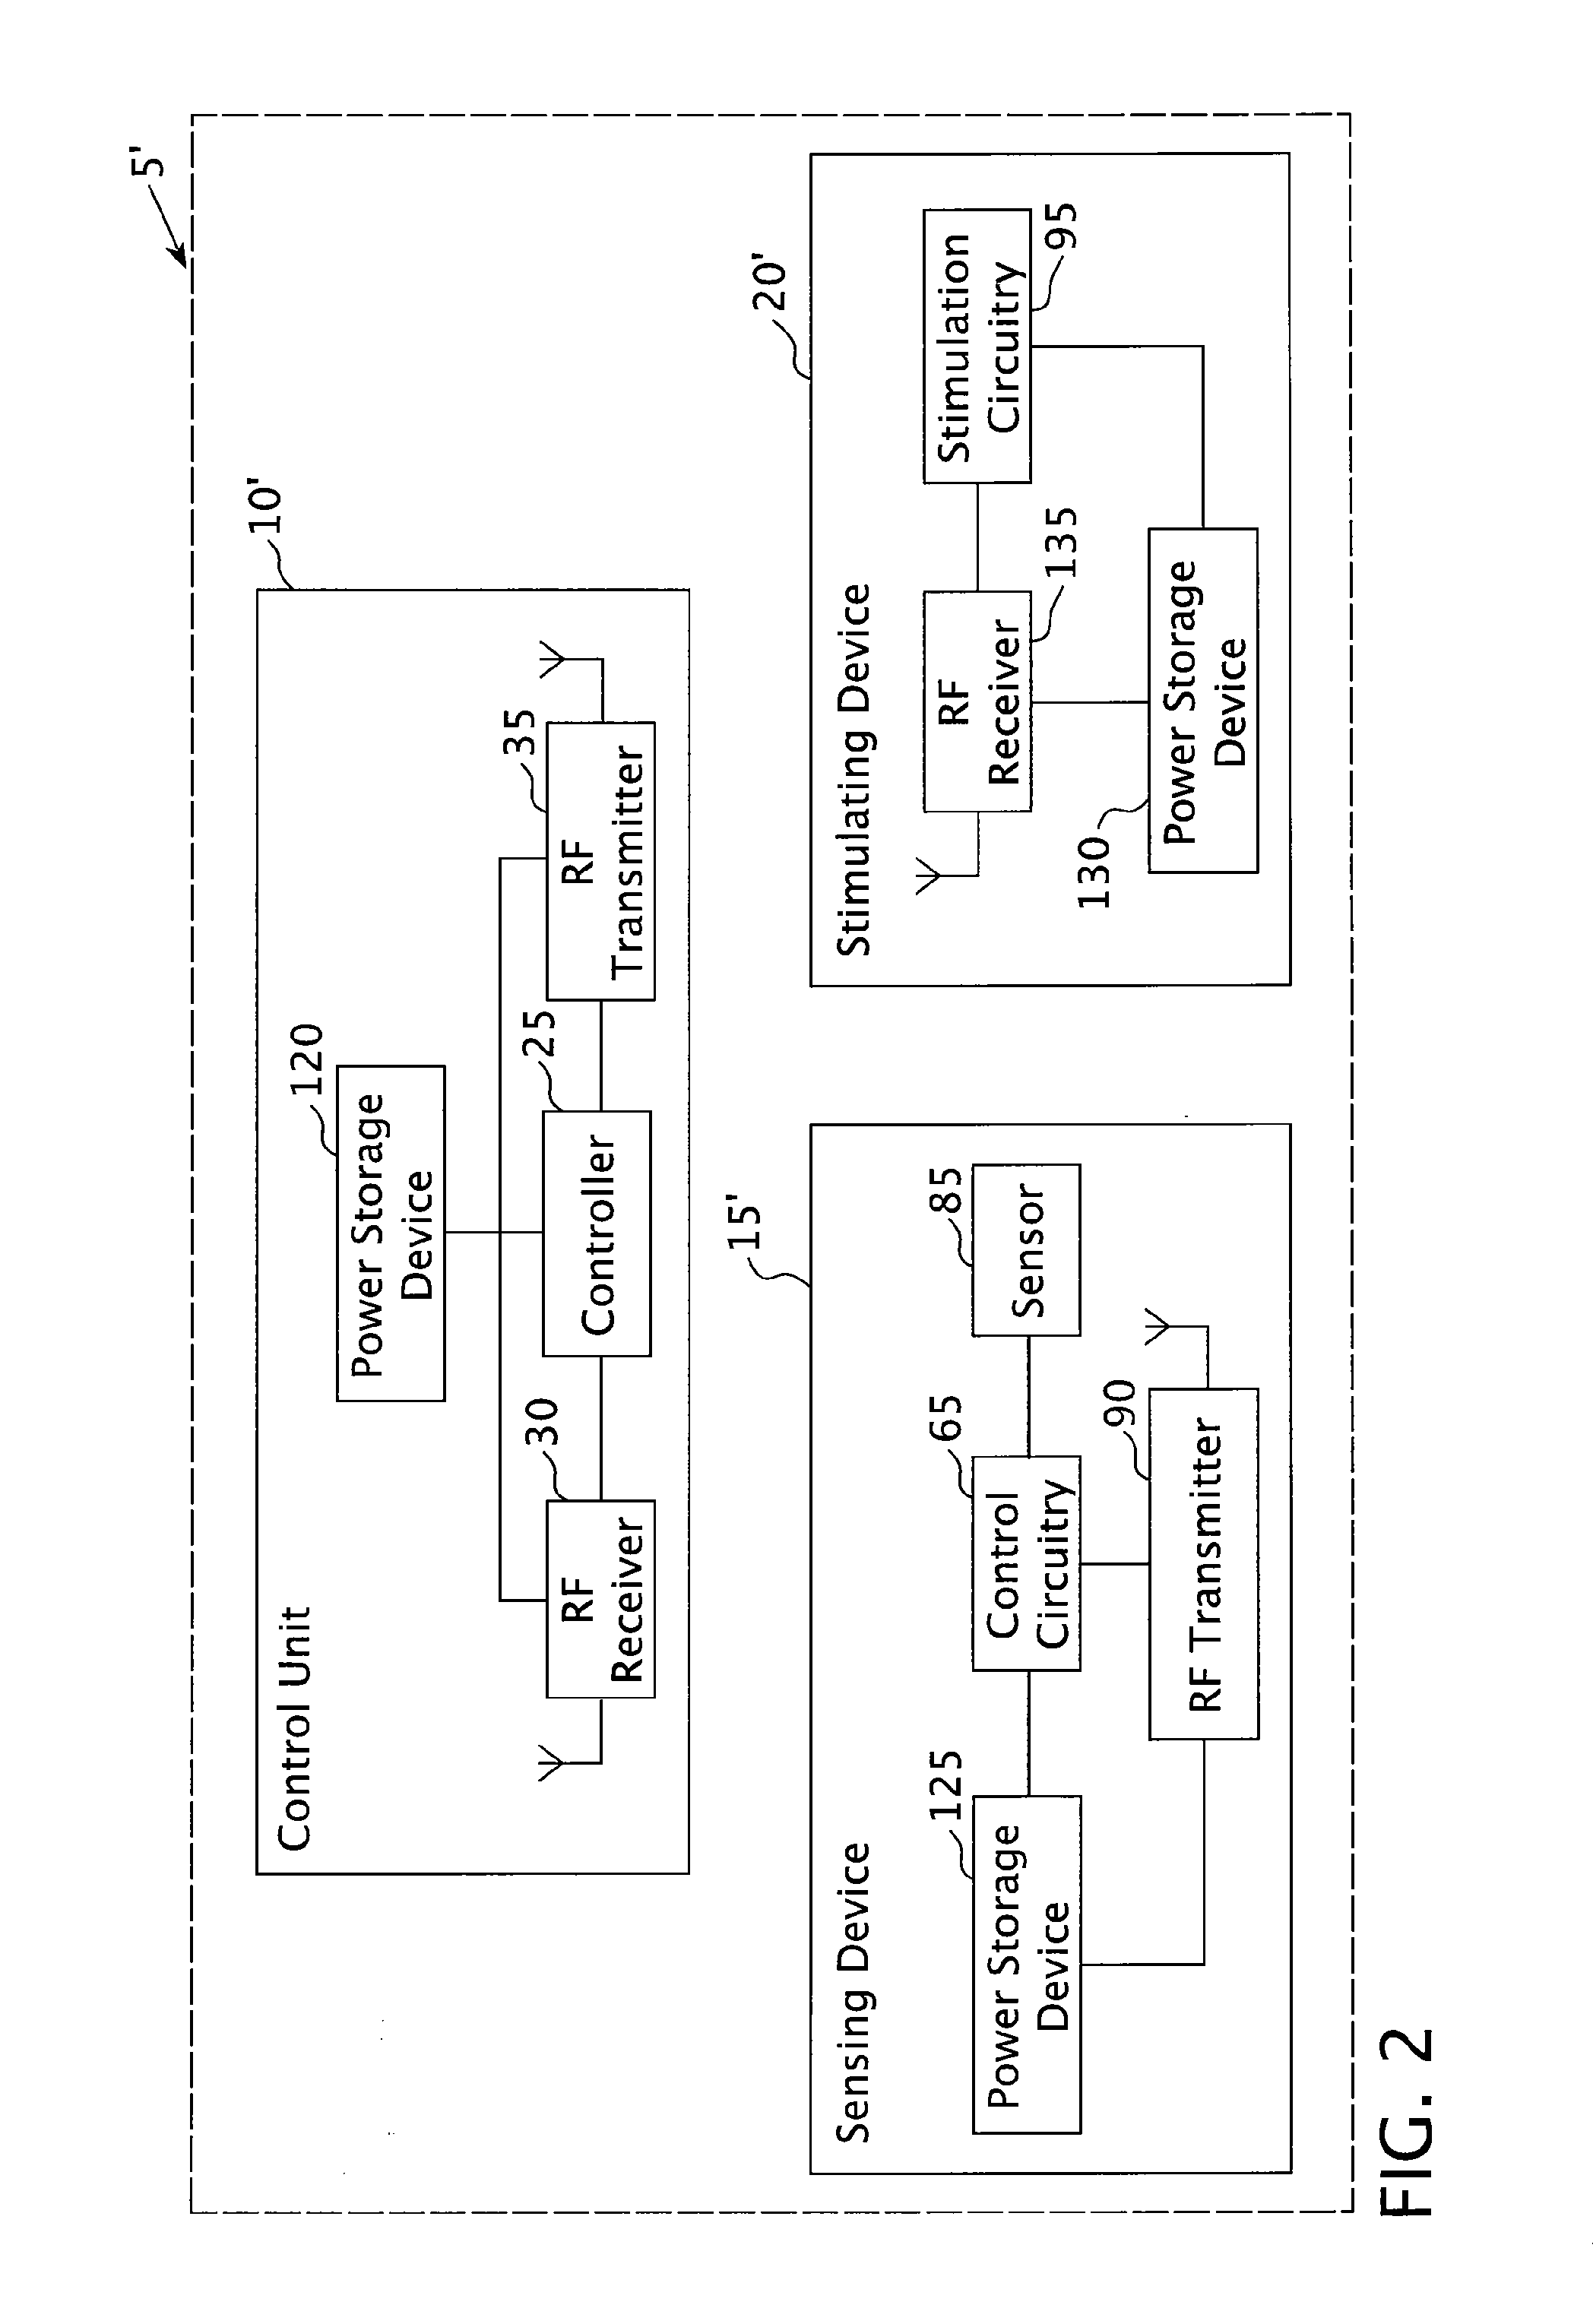 Method and apparatus for stimulating a denervated muscle